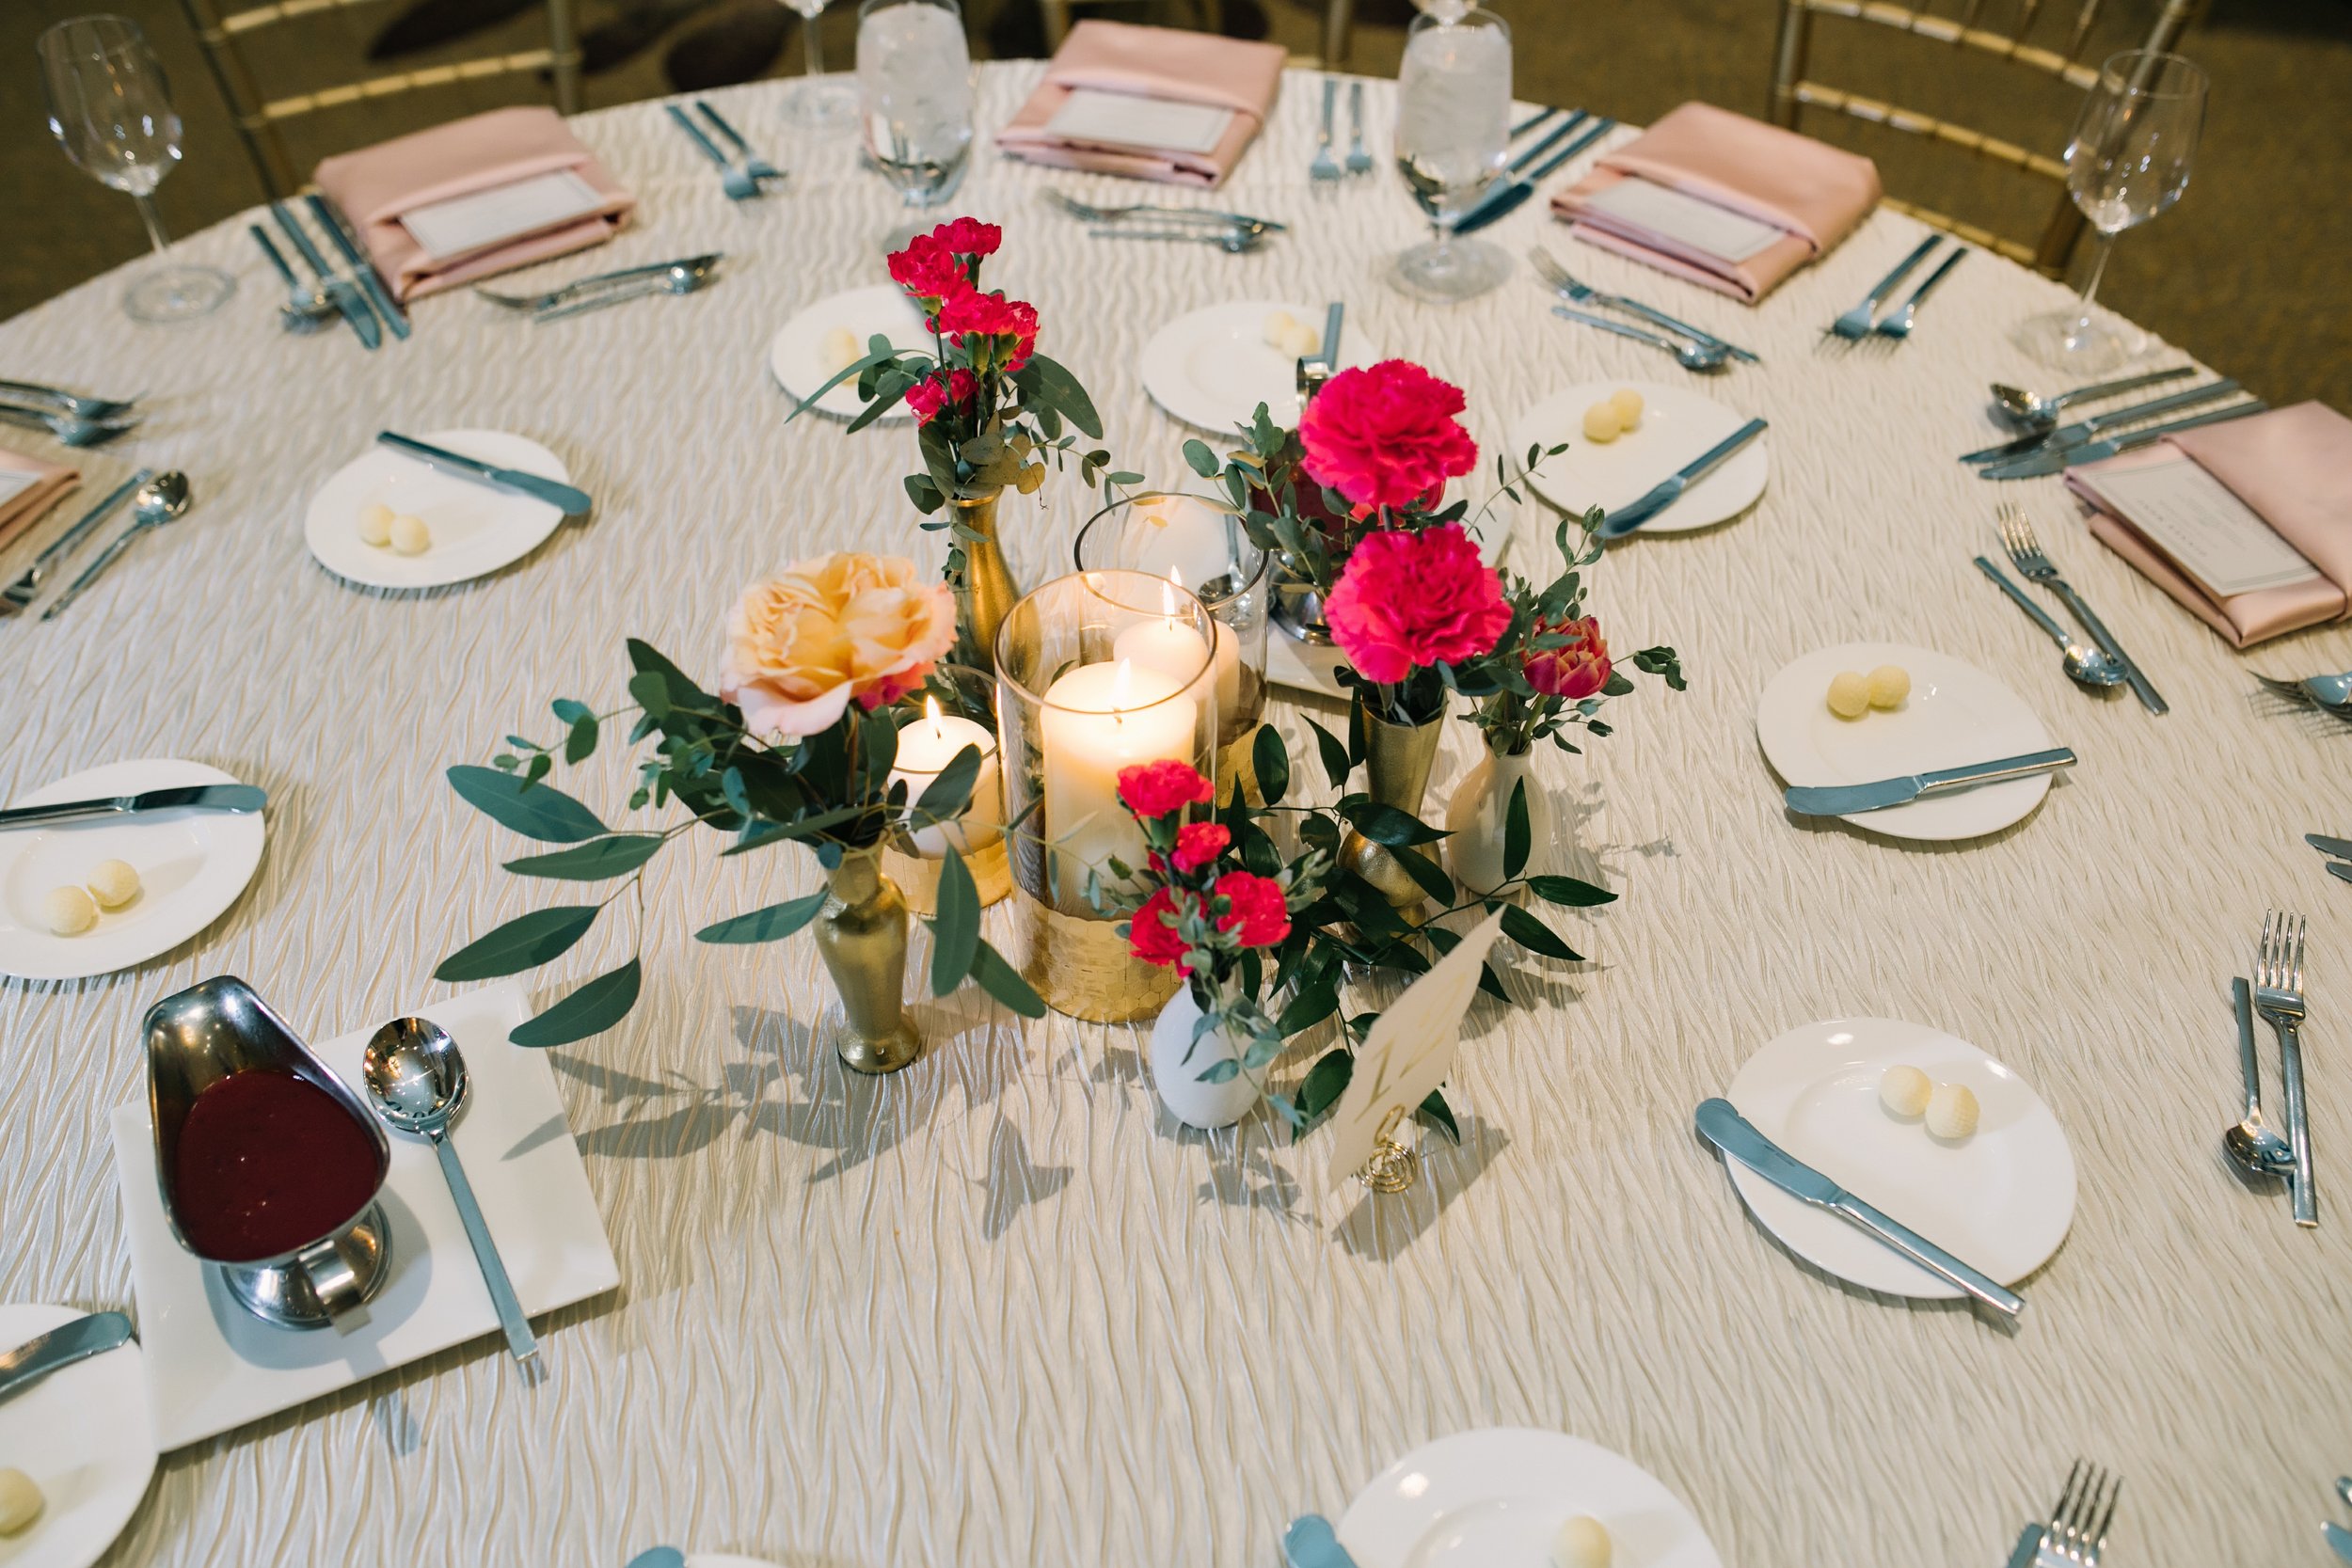 Centerpieces by Red Poppy Floral Design Ann Arbor